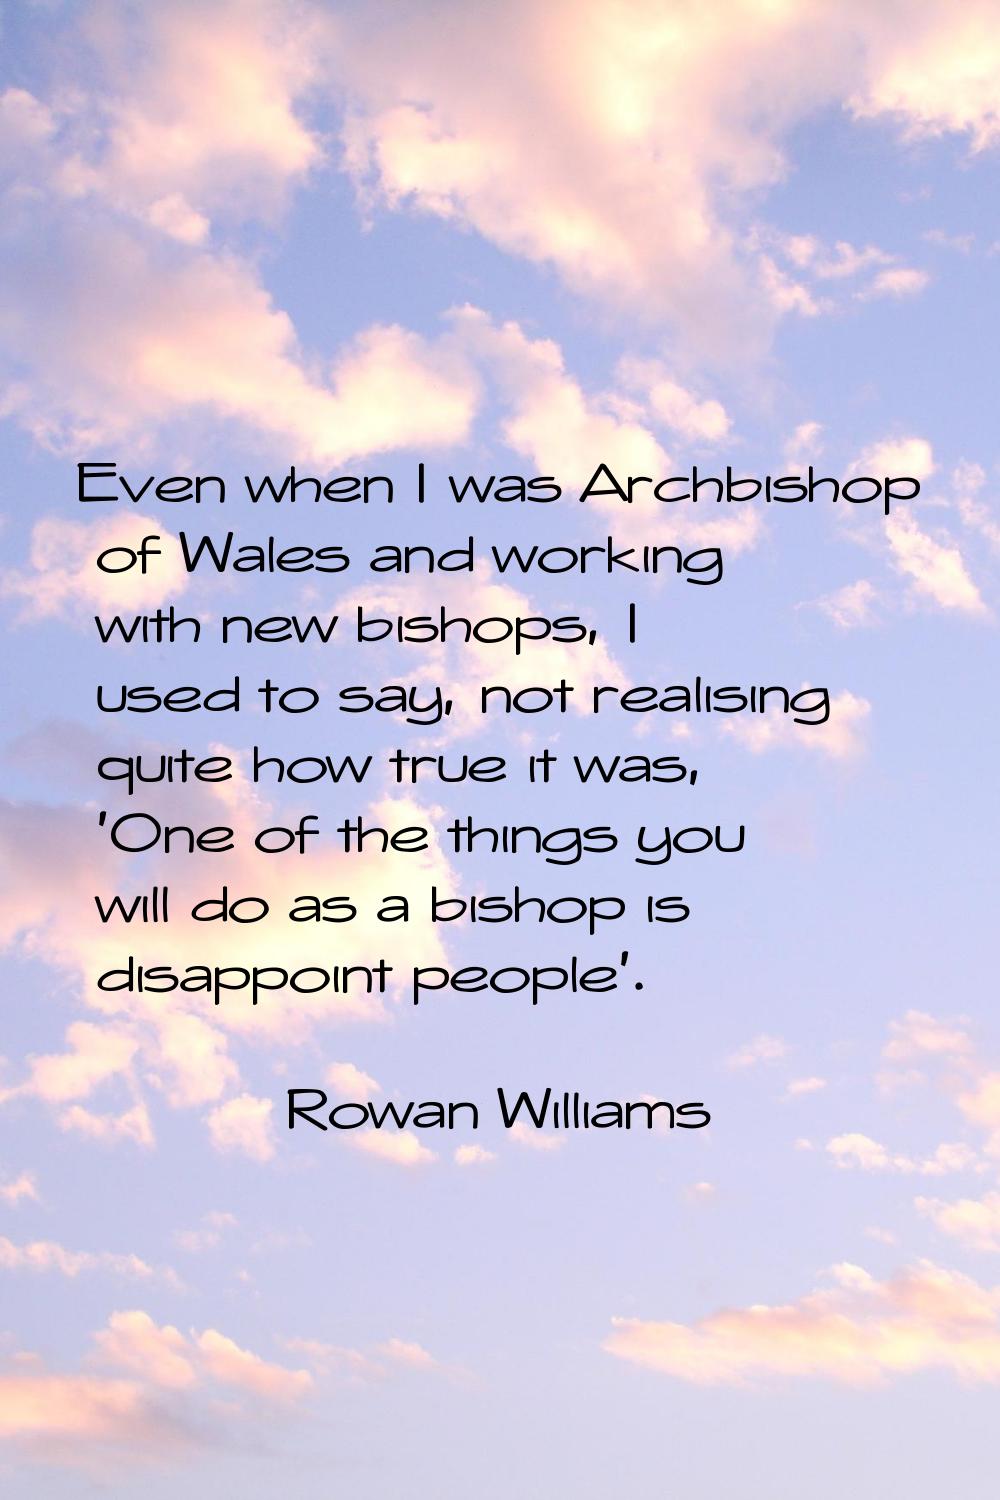 Even when I was Archbishop of Wales and working with new bishops, I used to say, not realising quit